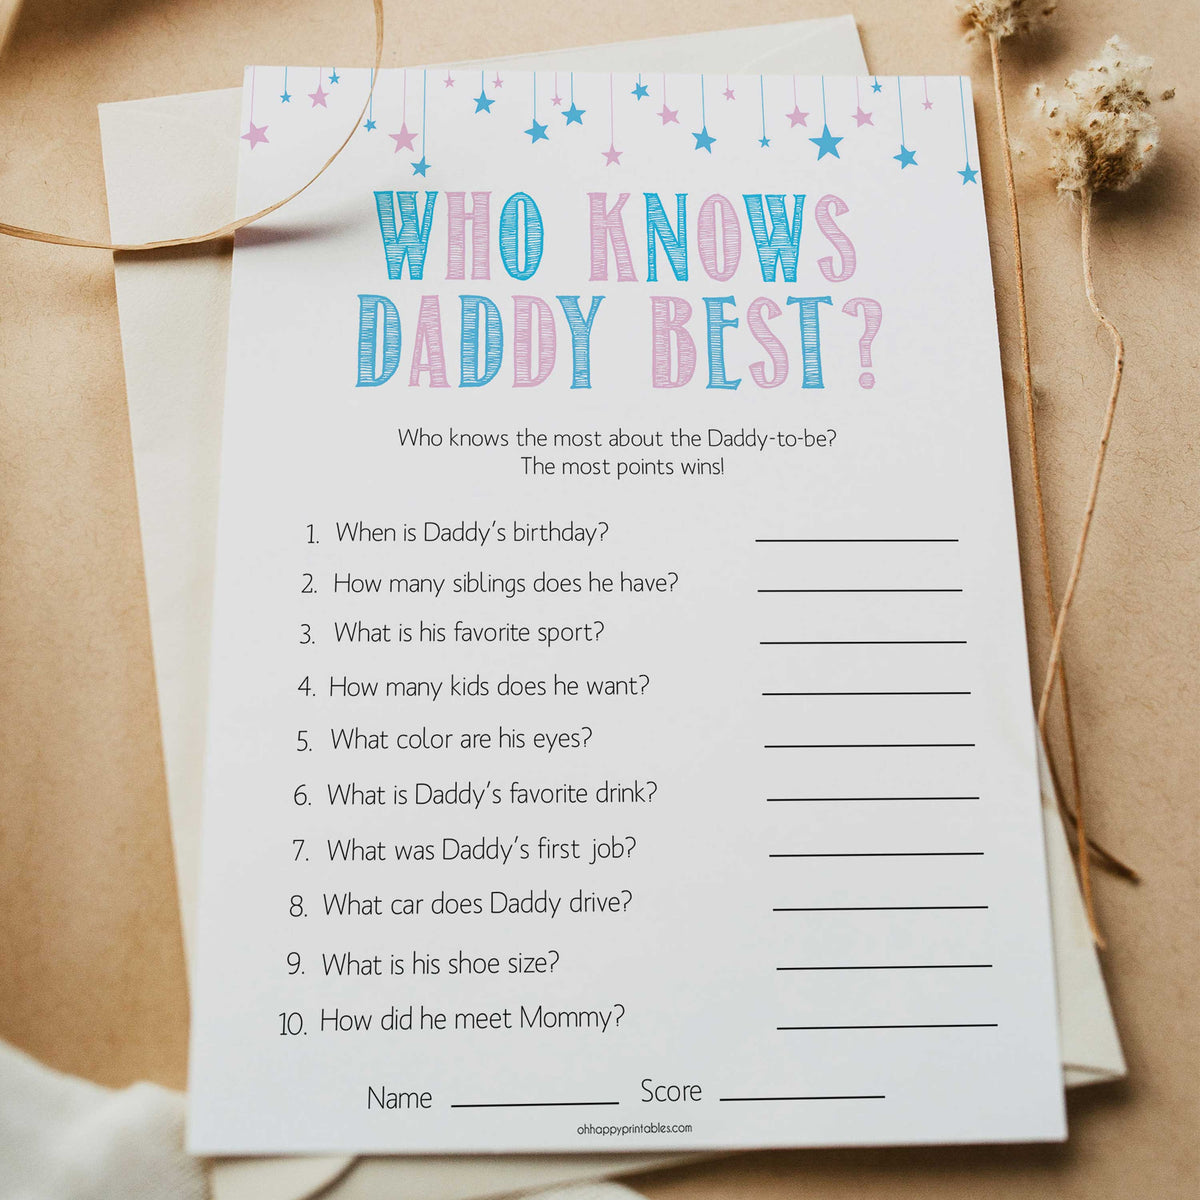 Gender reveal baby games, guess who mommy and daddy baby game